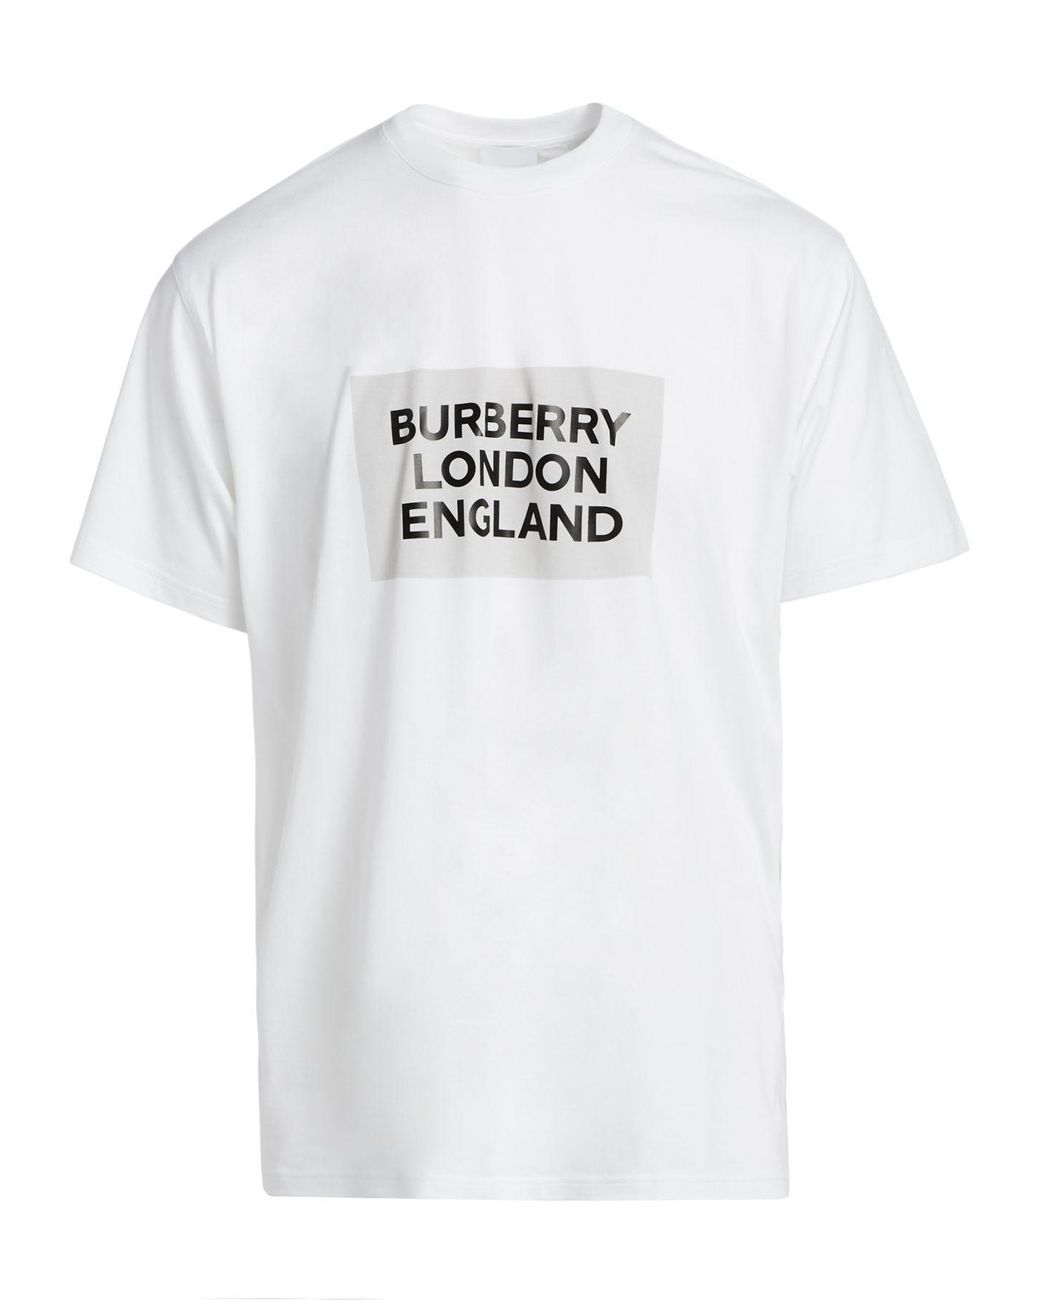 Burberry London England Logo Cotton T-shirt in White Lyst